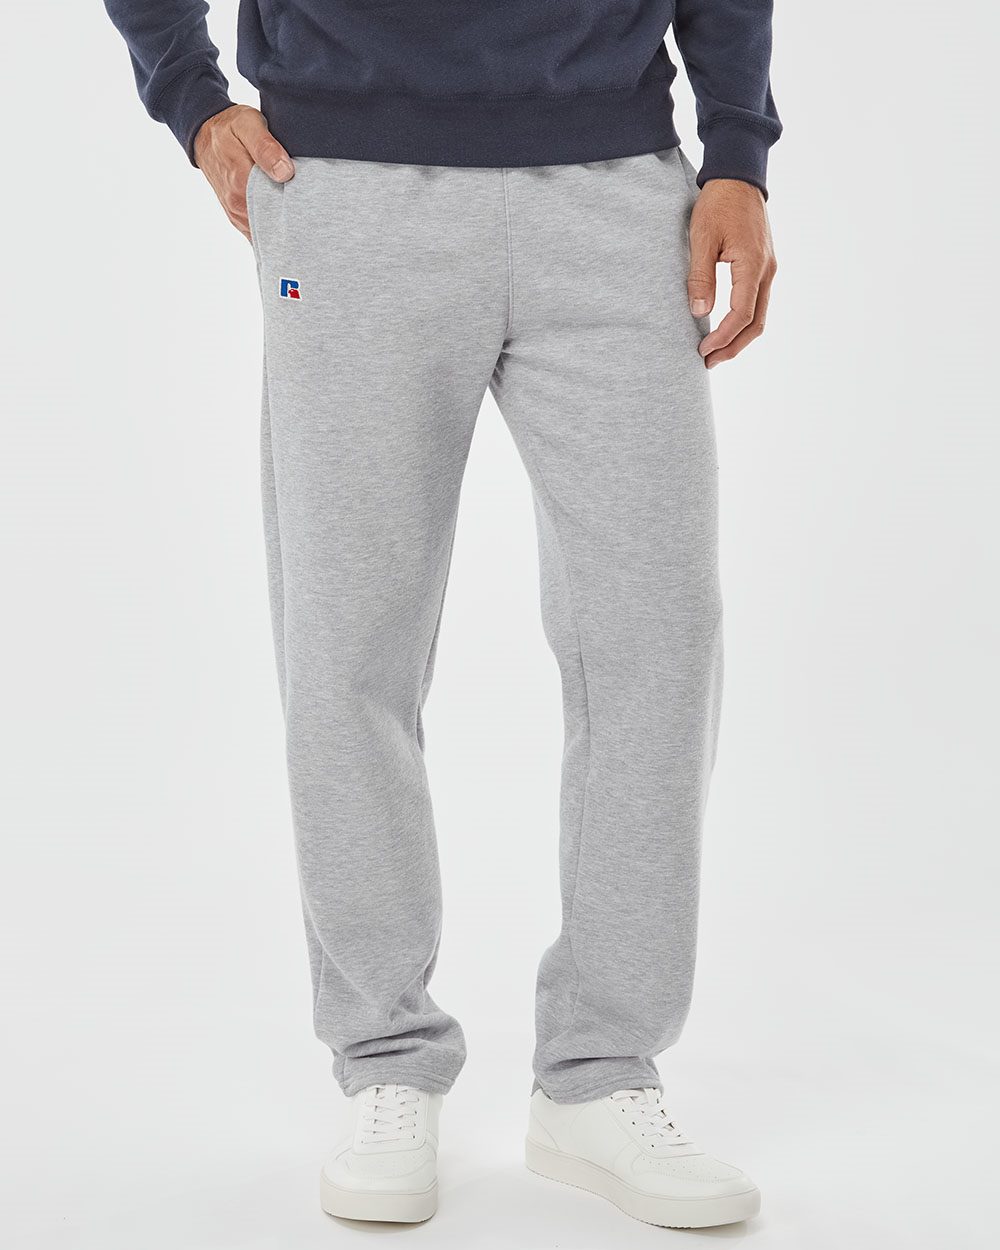 russell athletic women's cotton sweatpants